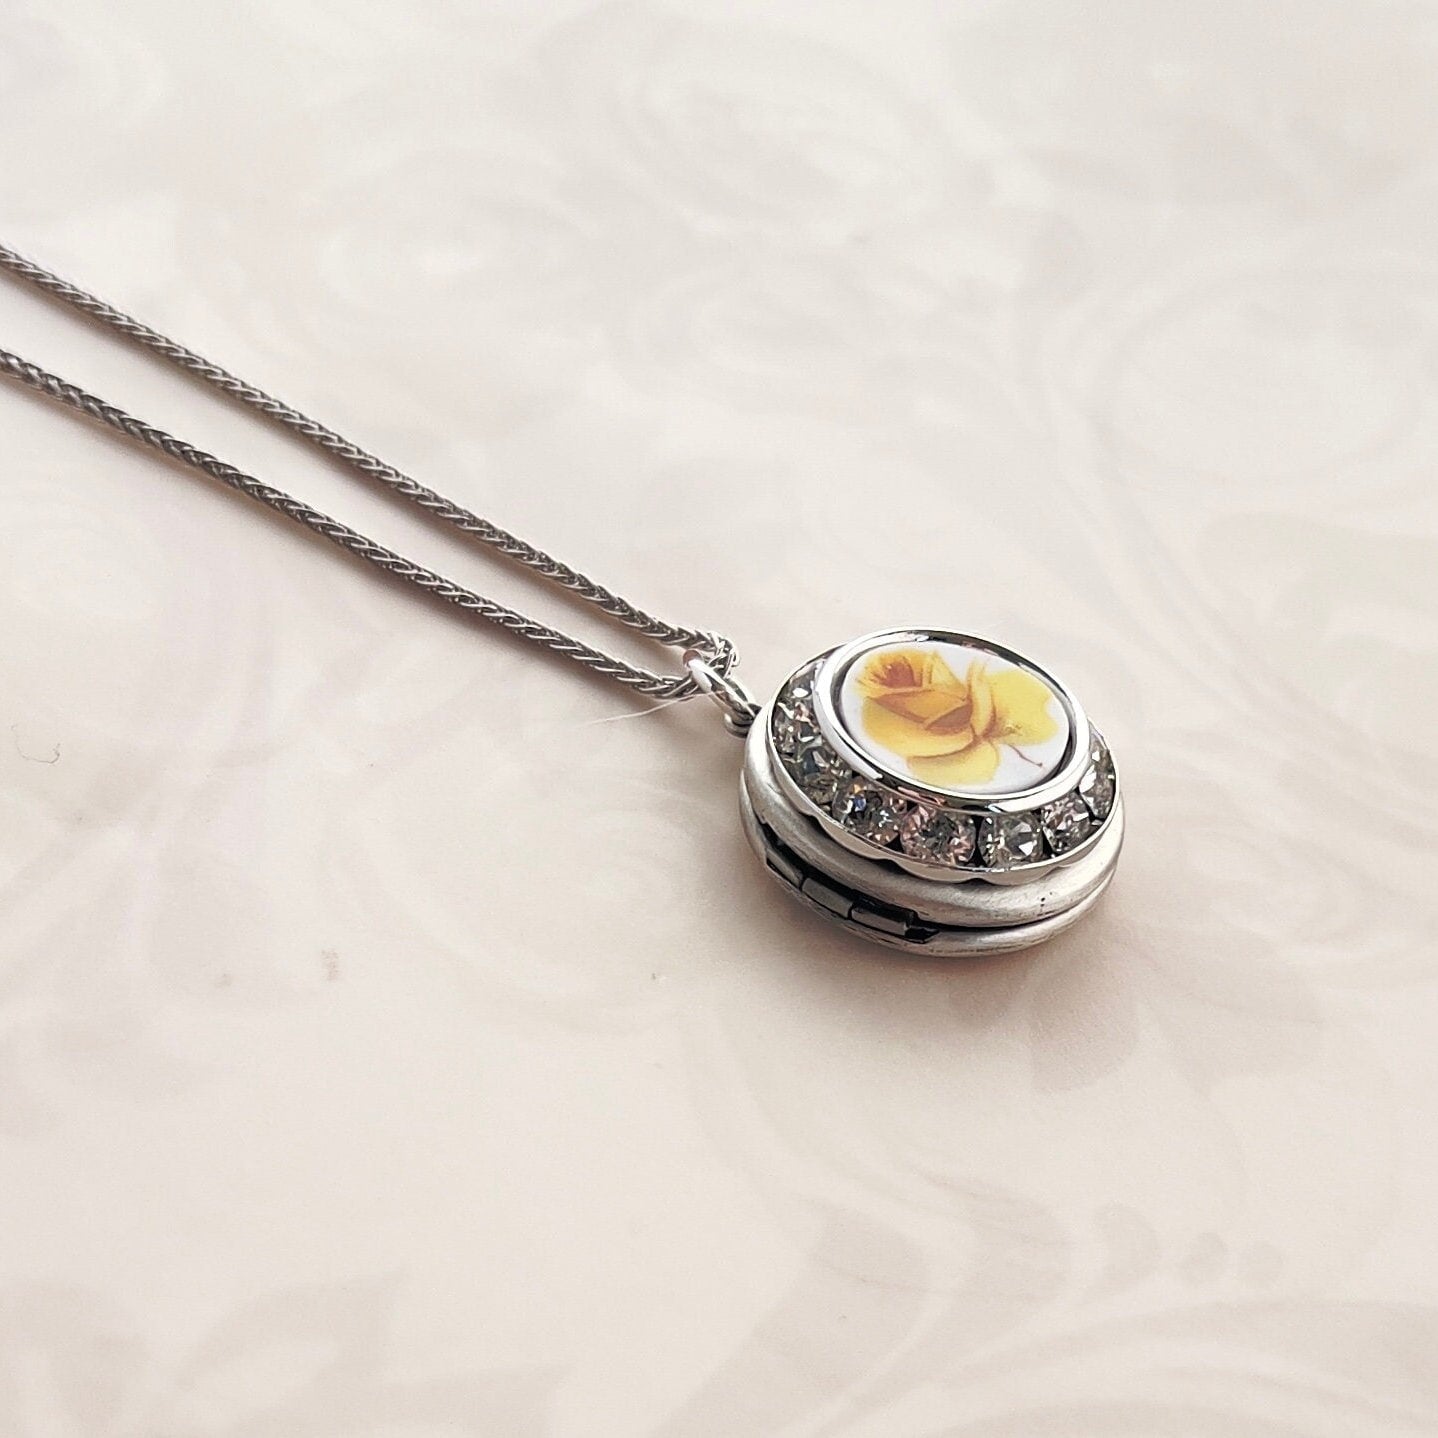 Adjustable Yellow Rose Friendship Locket Necklace, Special Friend Gift, Broken China Jewelry